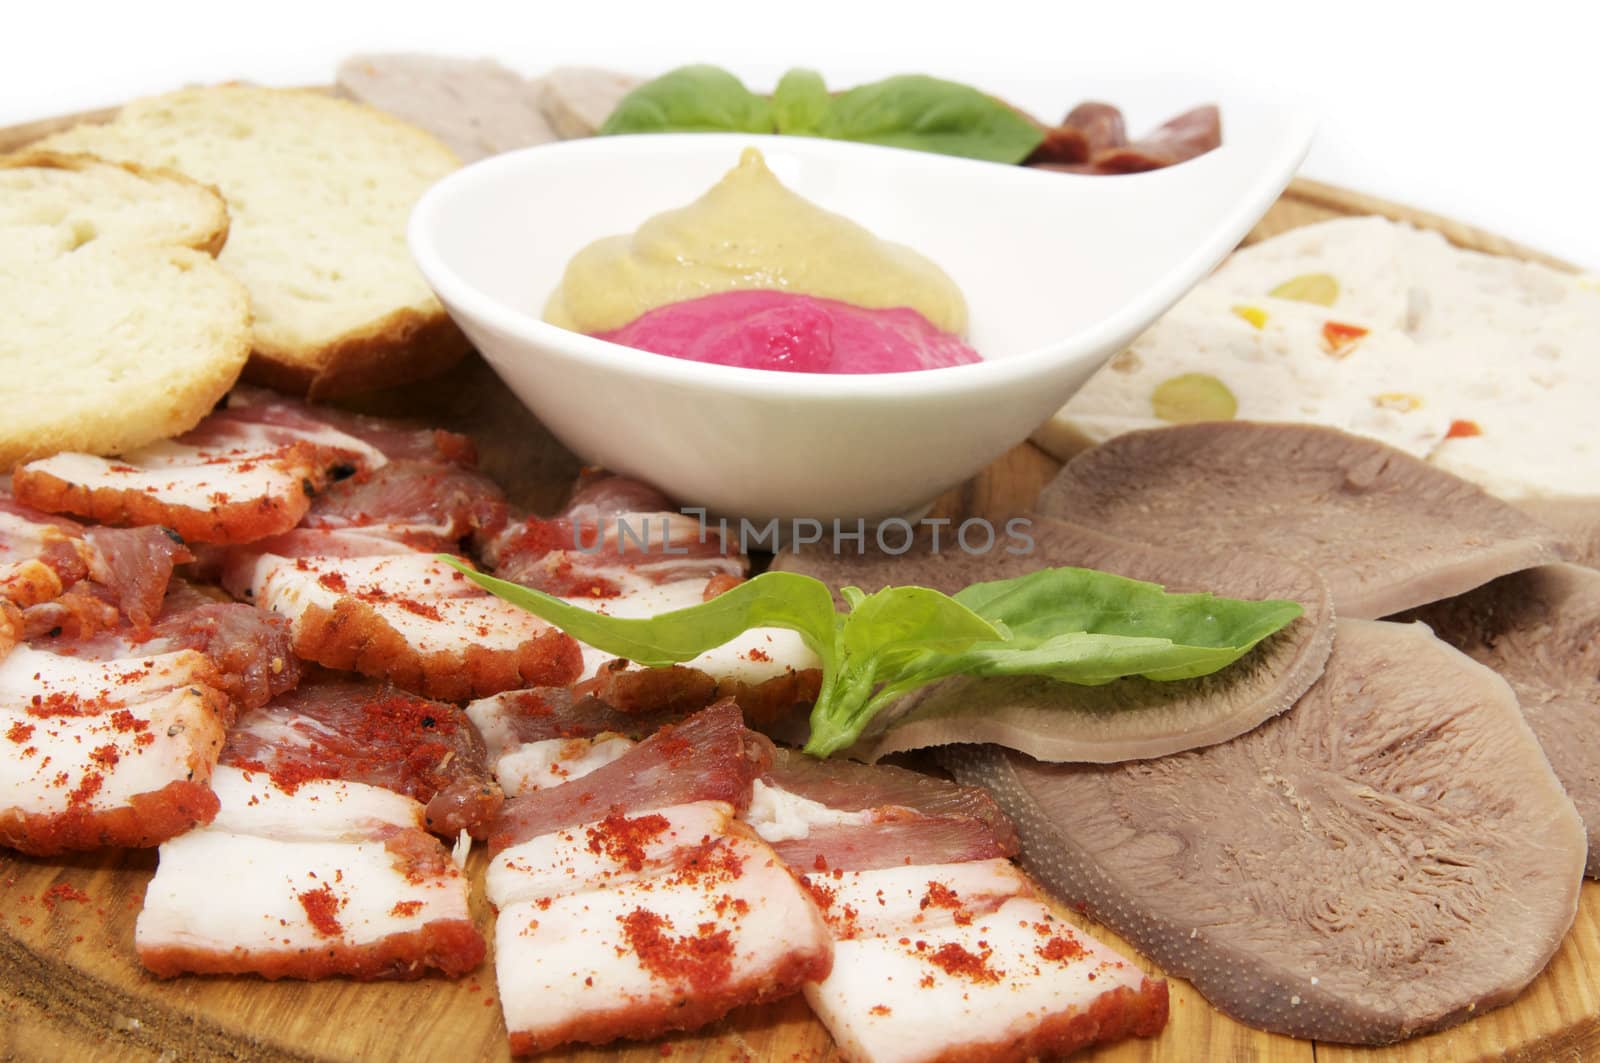 a plate of bacon and sausage on a white background